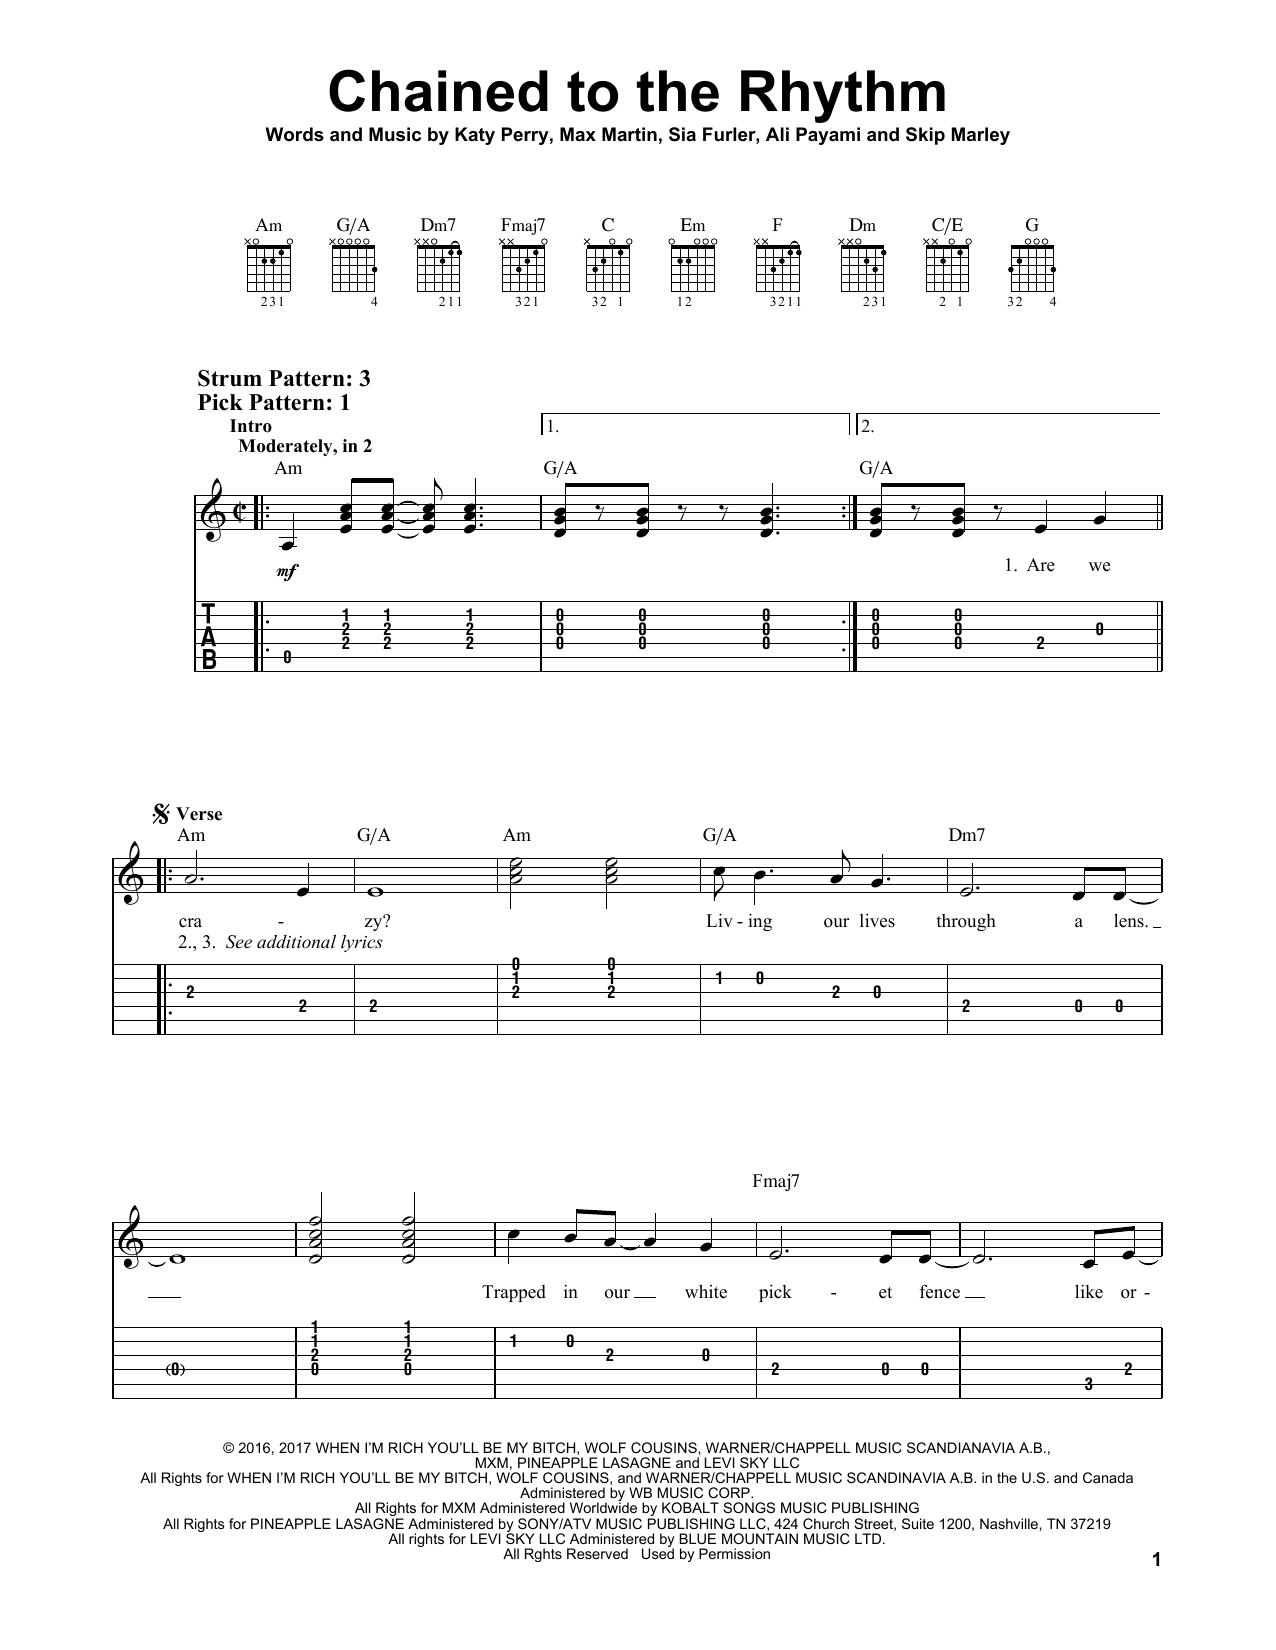 Download Katy Perry Chained To The Rhythm Sheet Music